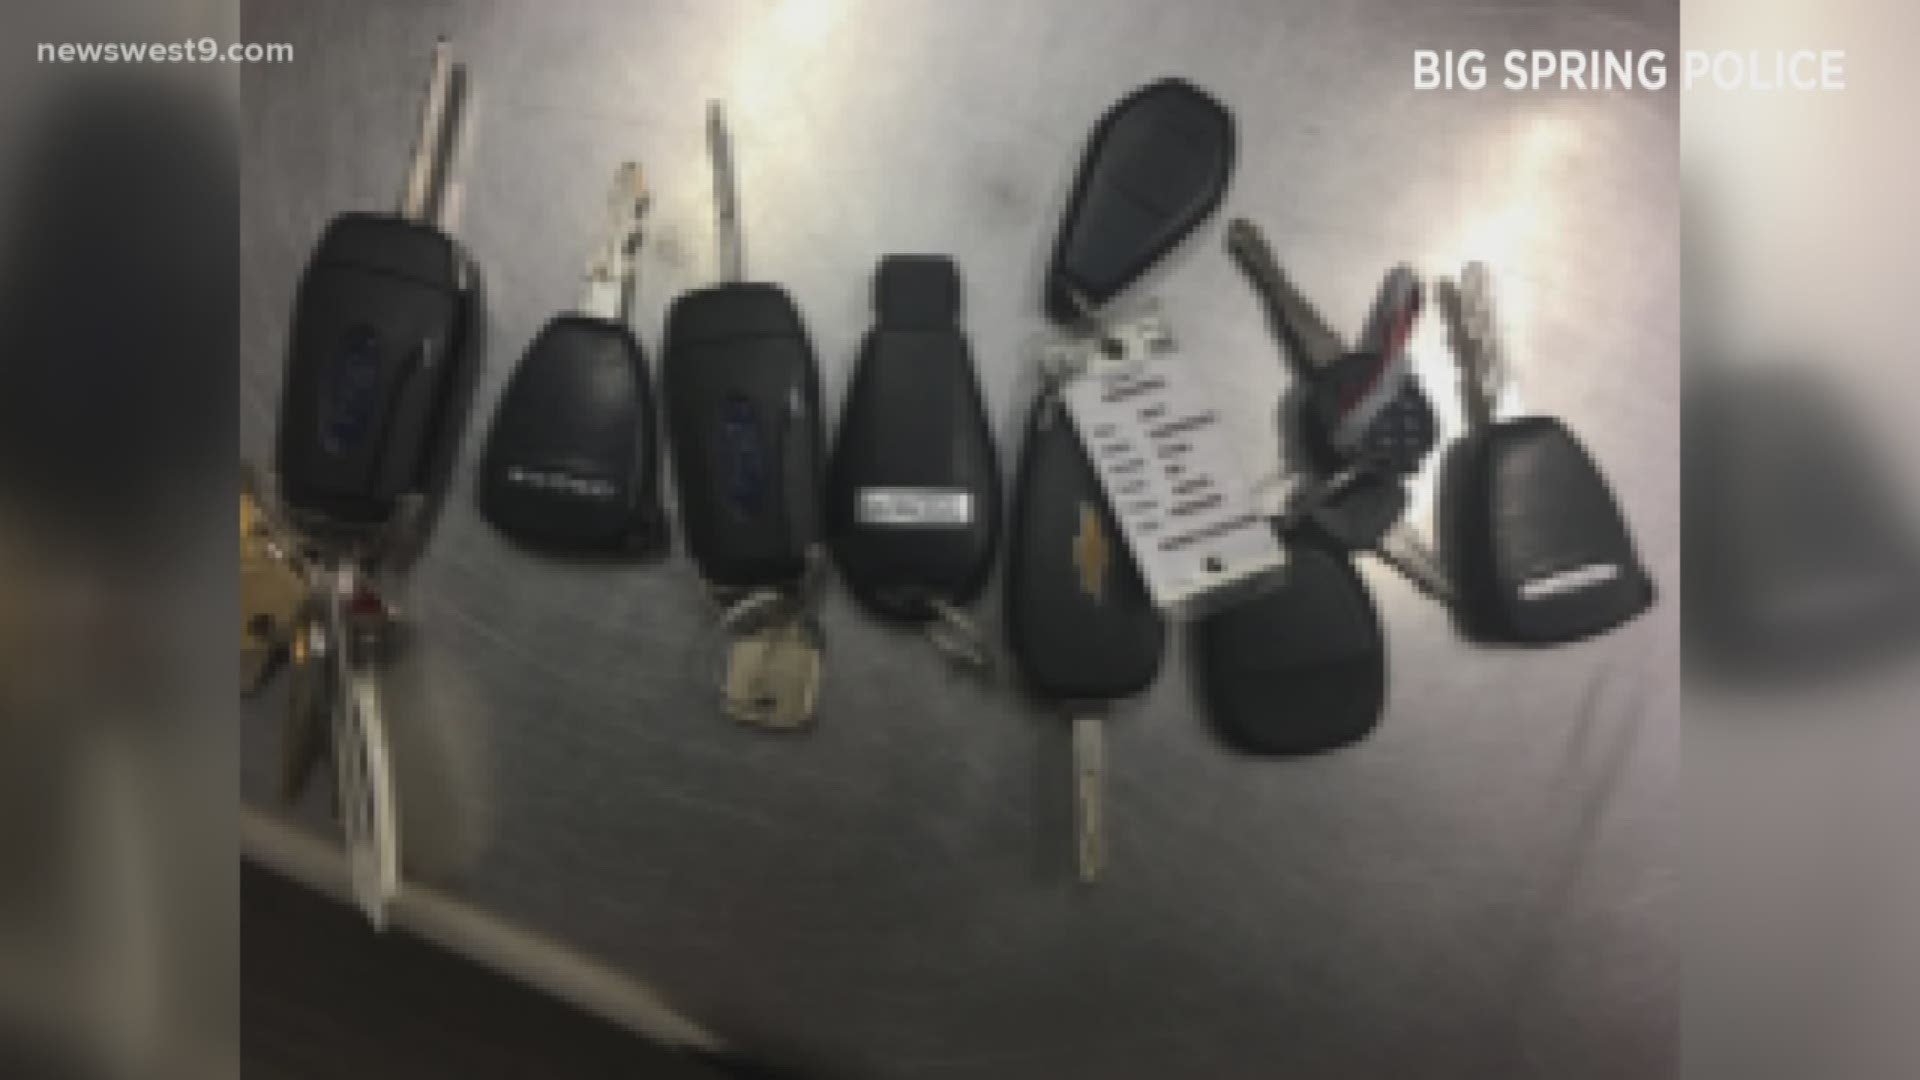 BS Police arrested a man with several stole key fobs in his possession